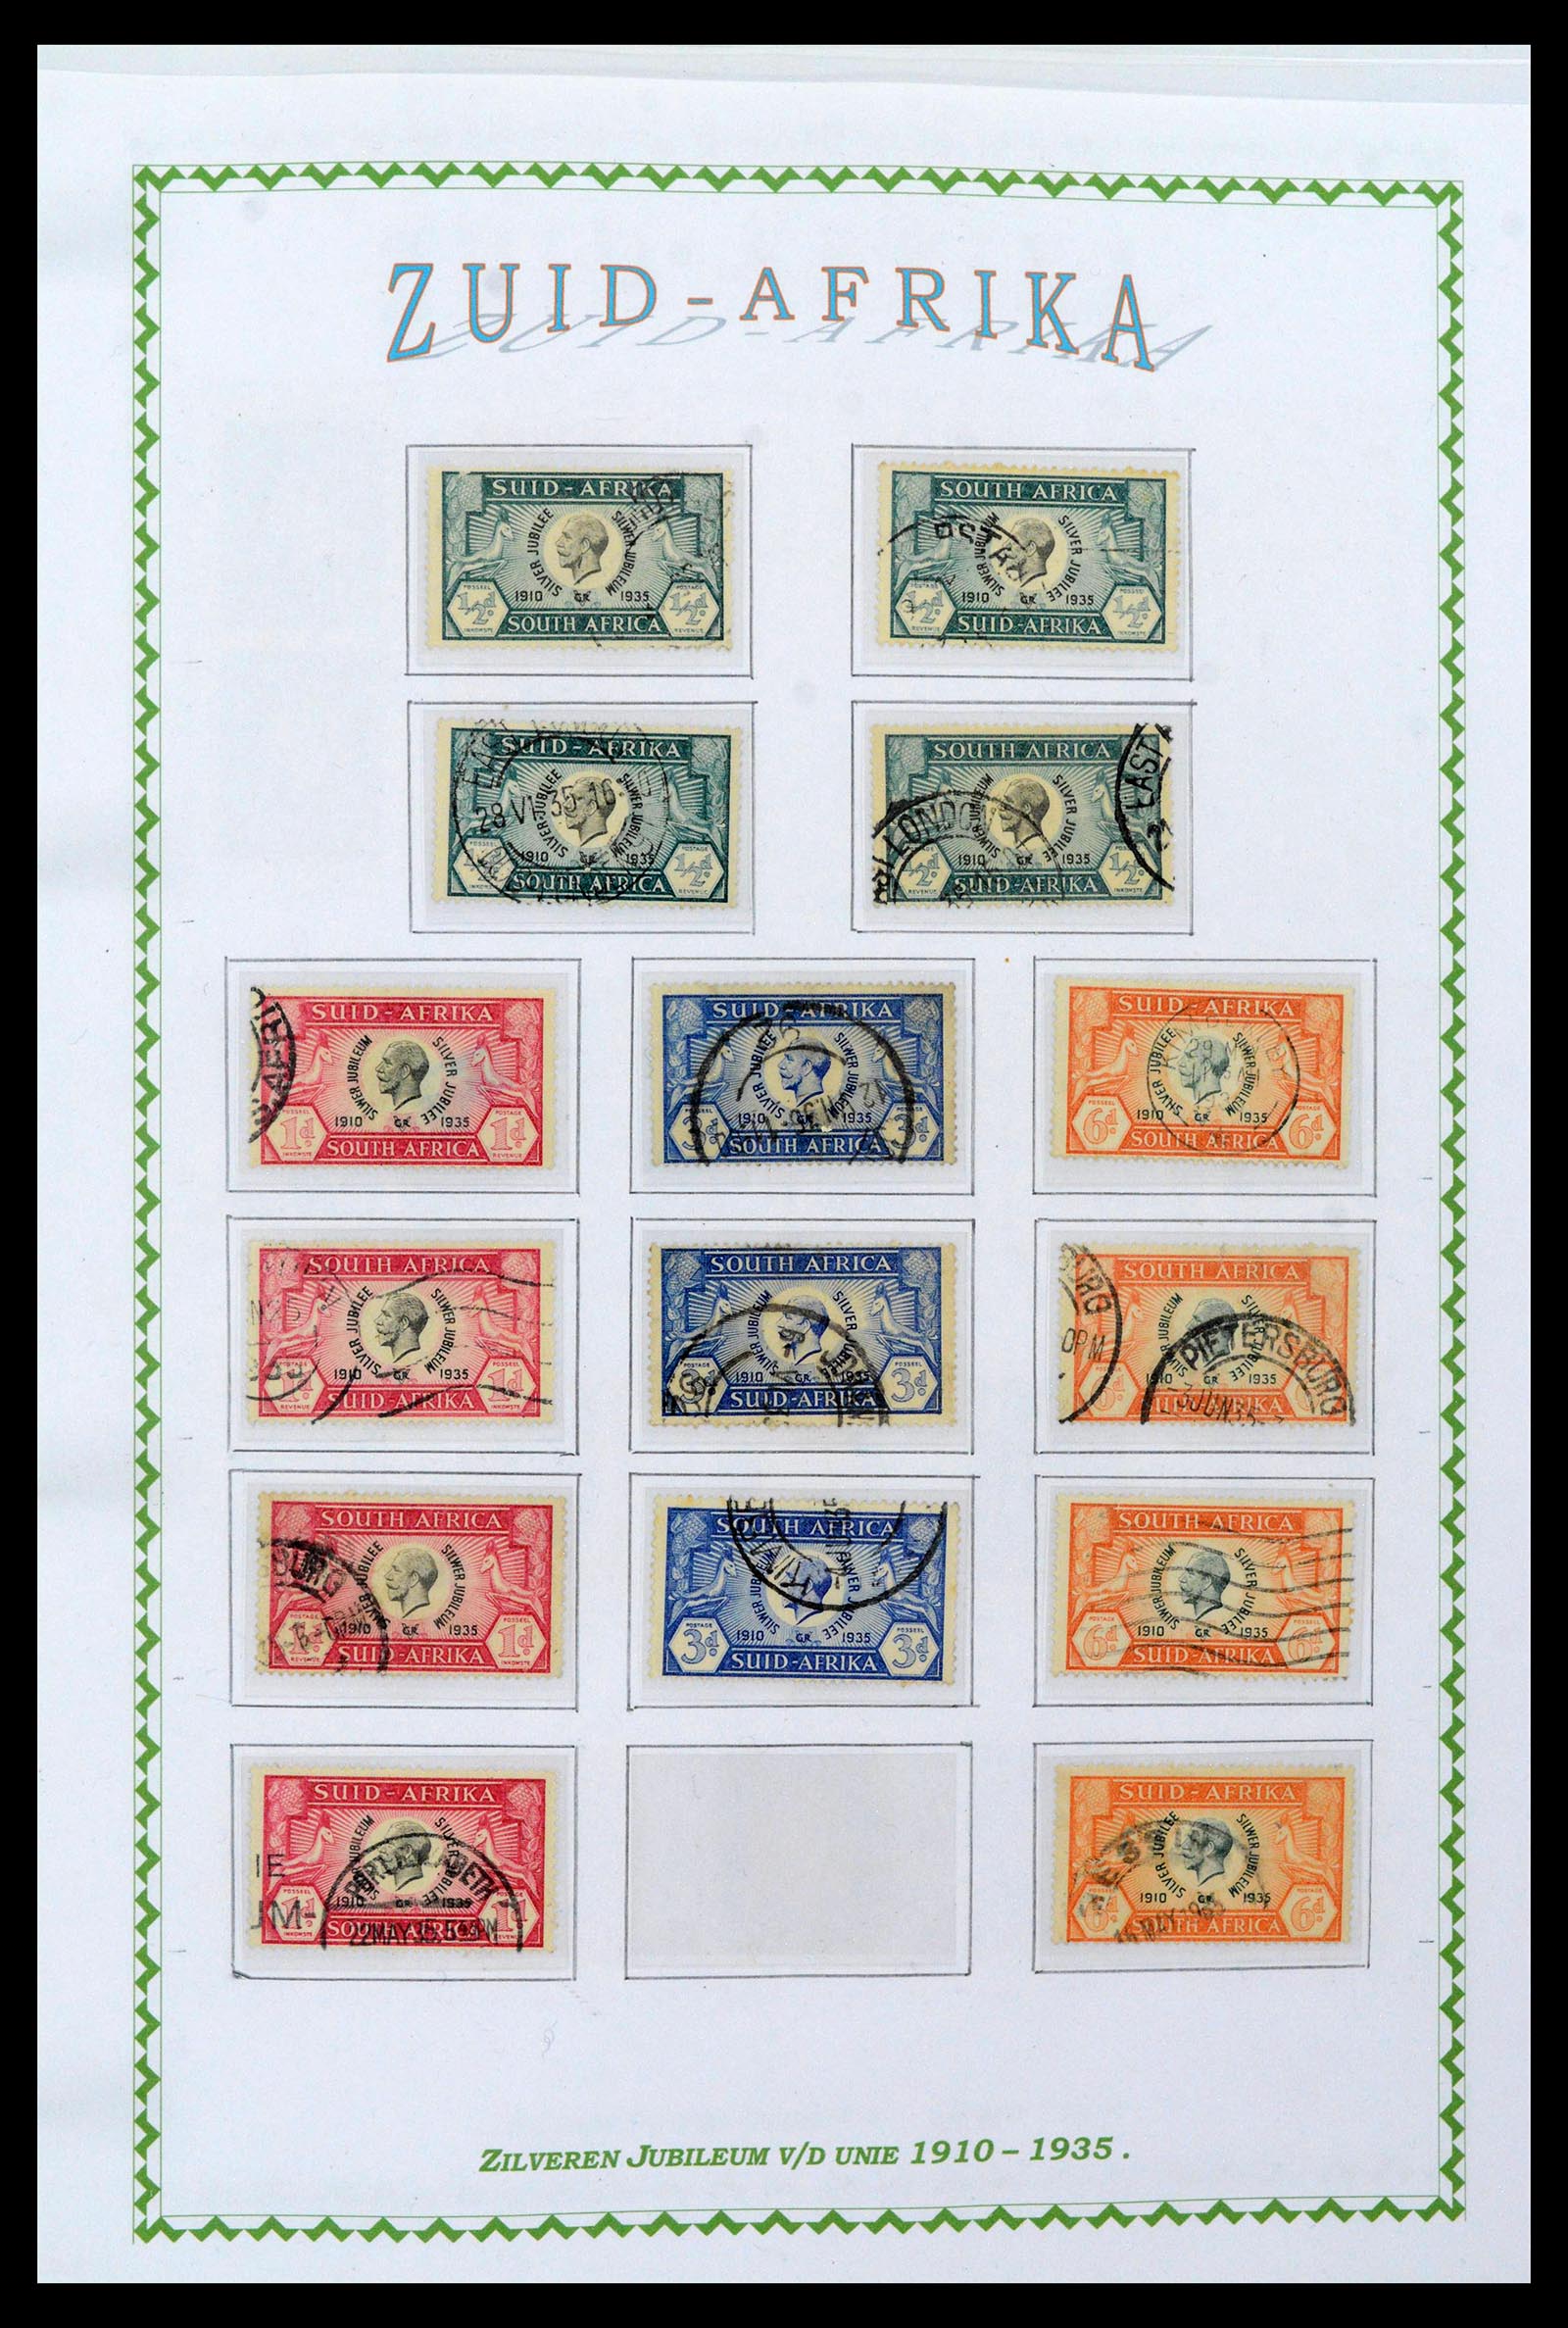 39226 0034 - Stamp collection 39226 South Africa and States 1853-2000.